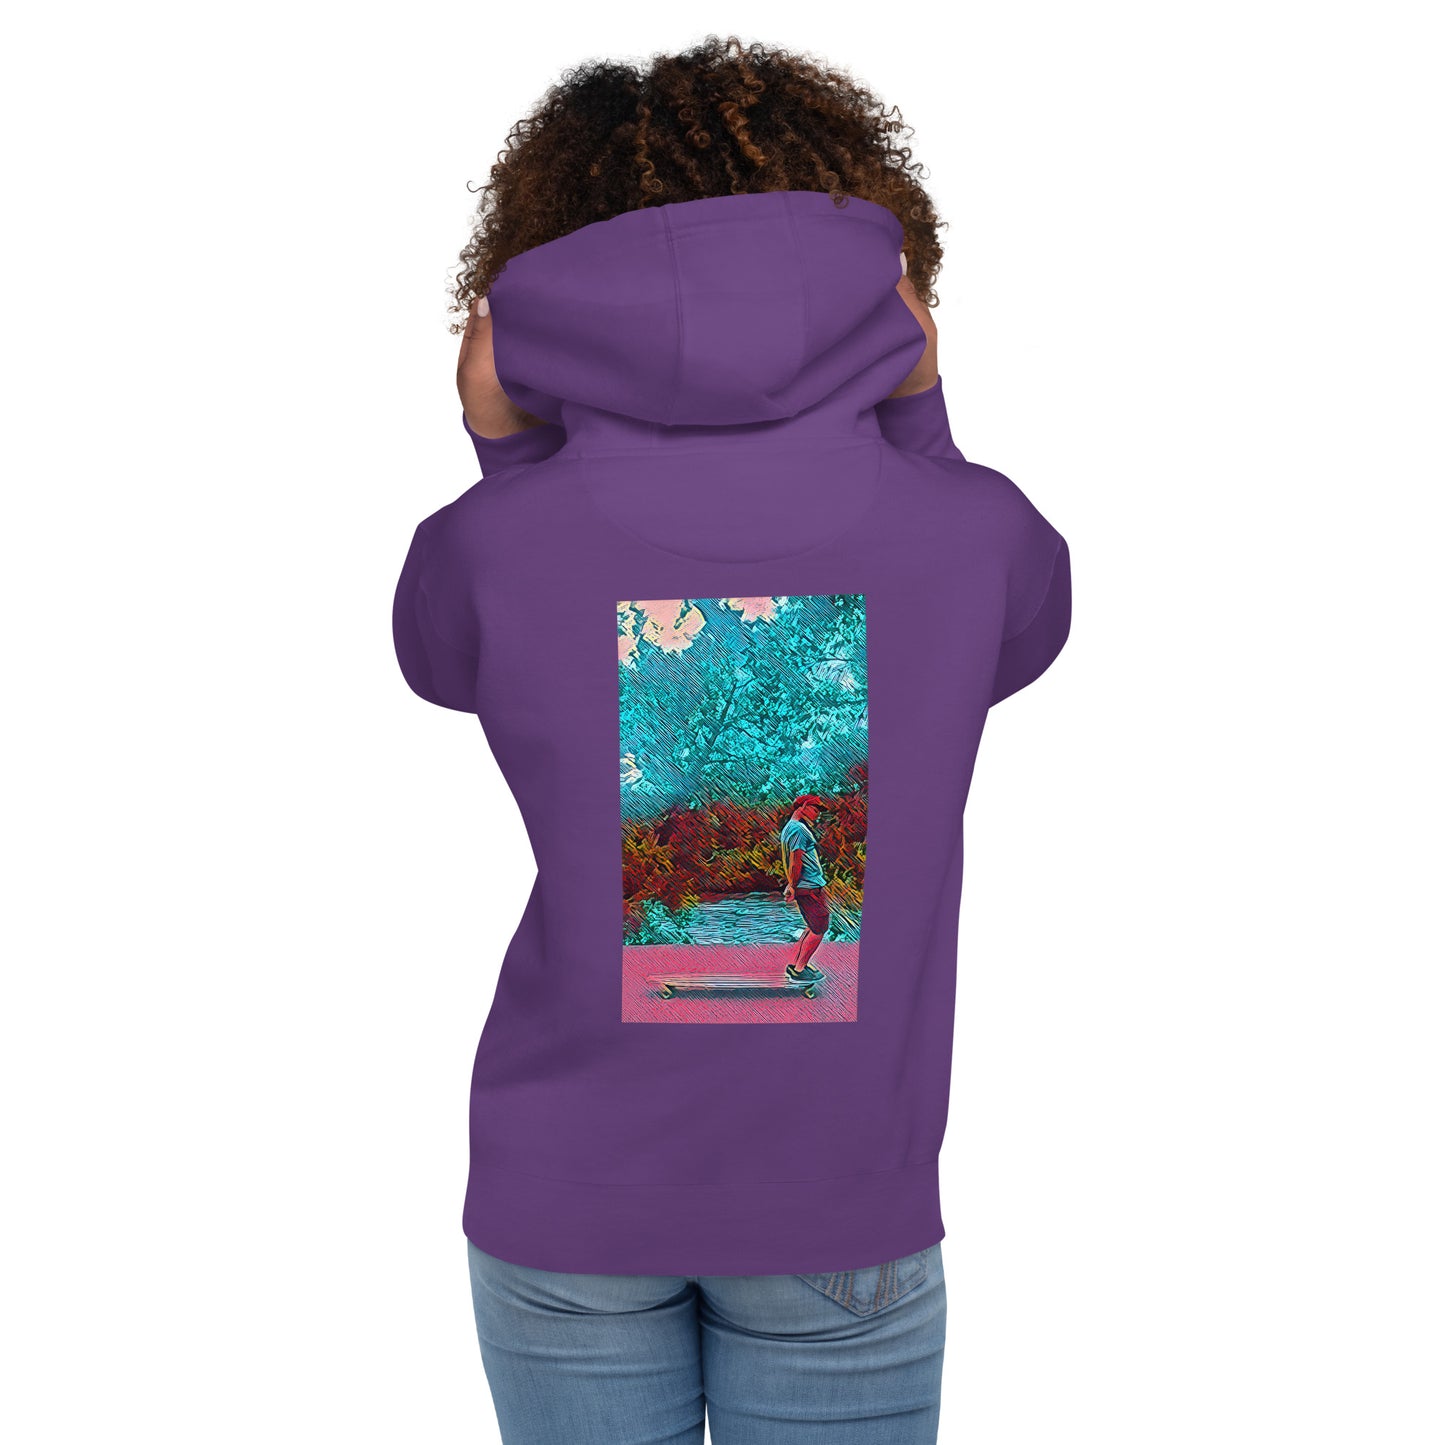 The nose rider (hoodie)